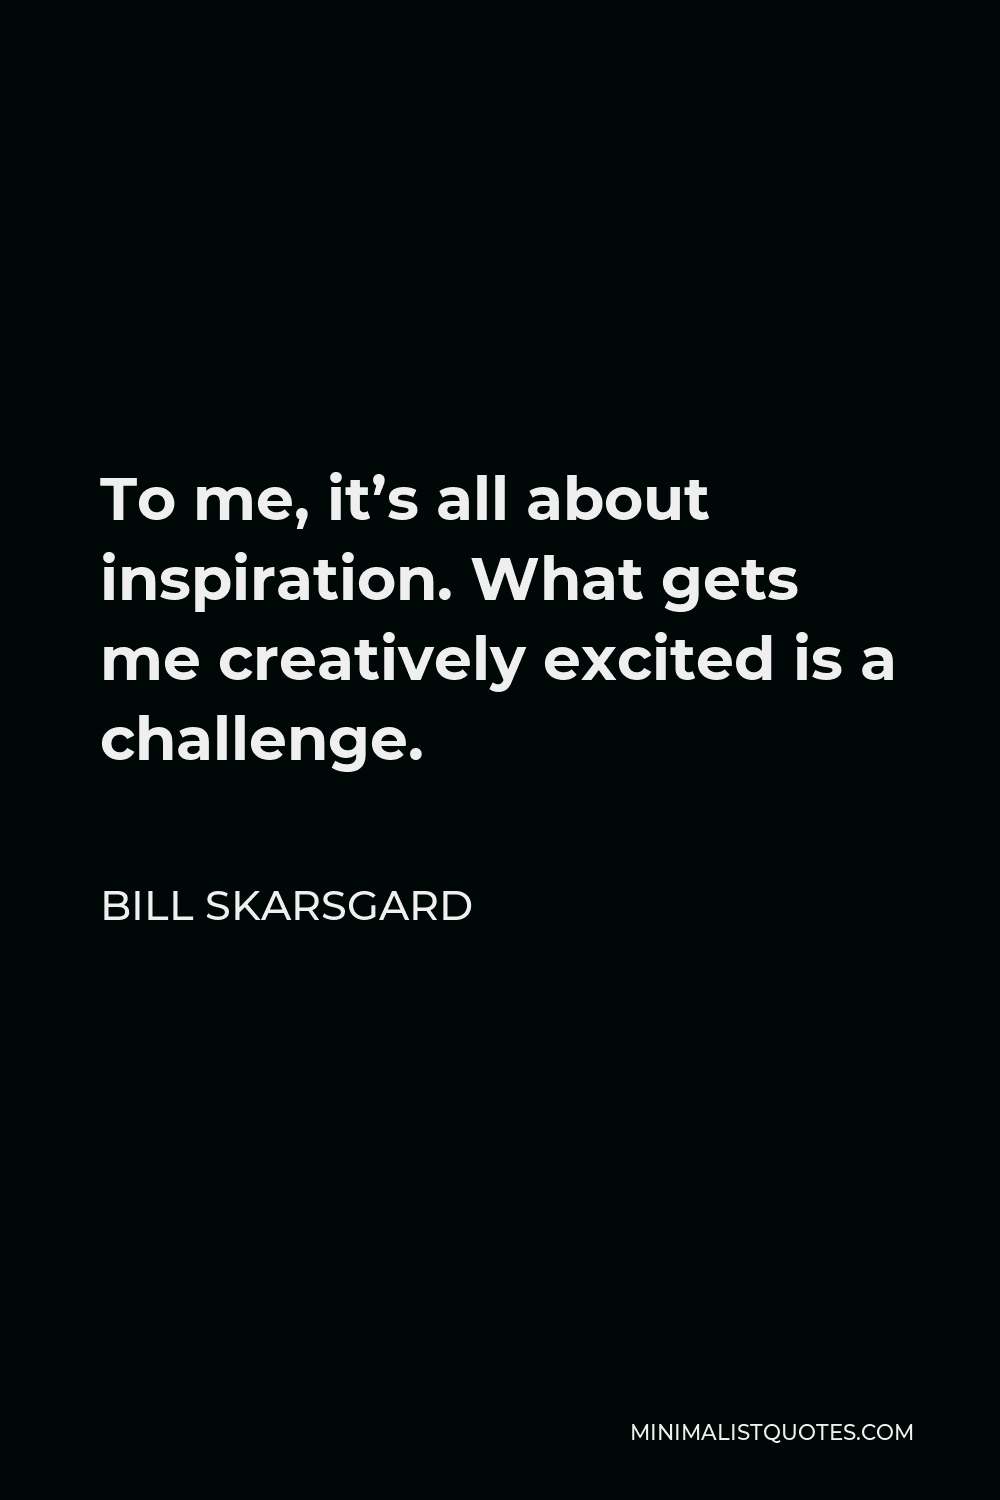 Bill Skarsgard Quote - To me, it’s all about inspiration. What gets me creatively excited is a challenge.